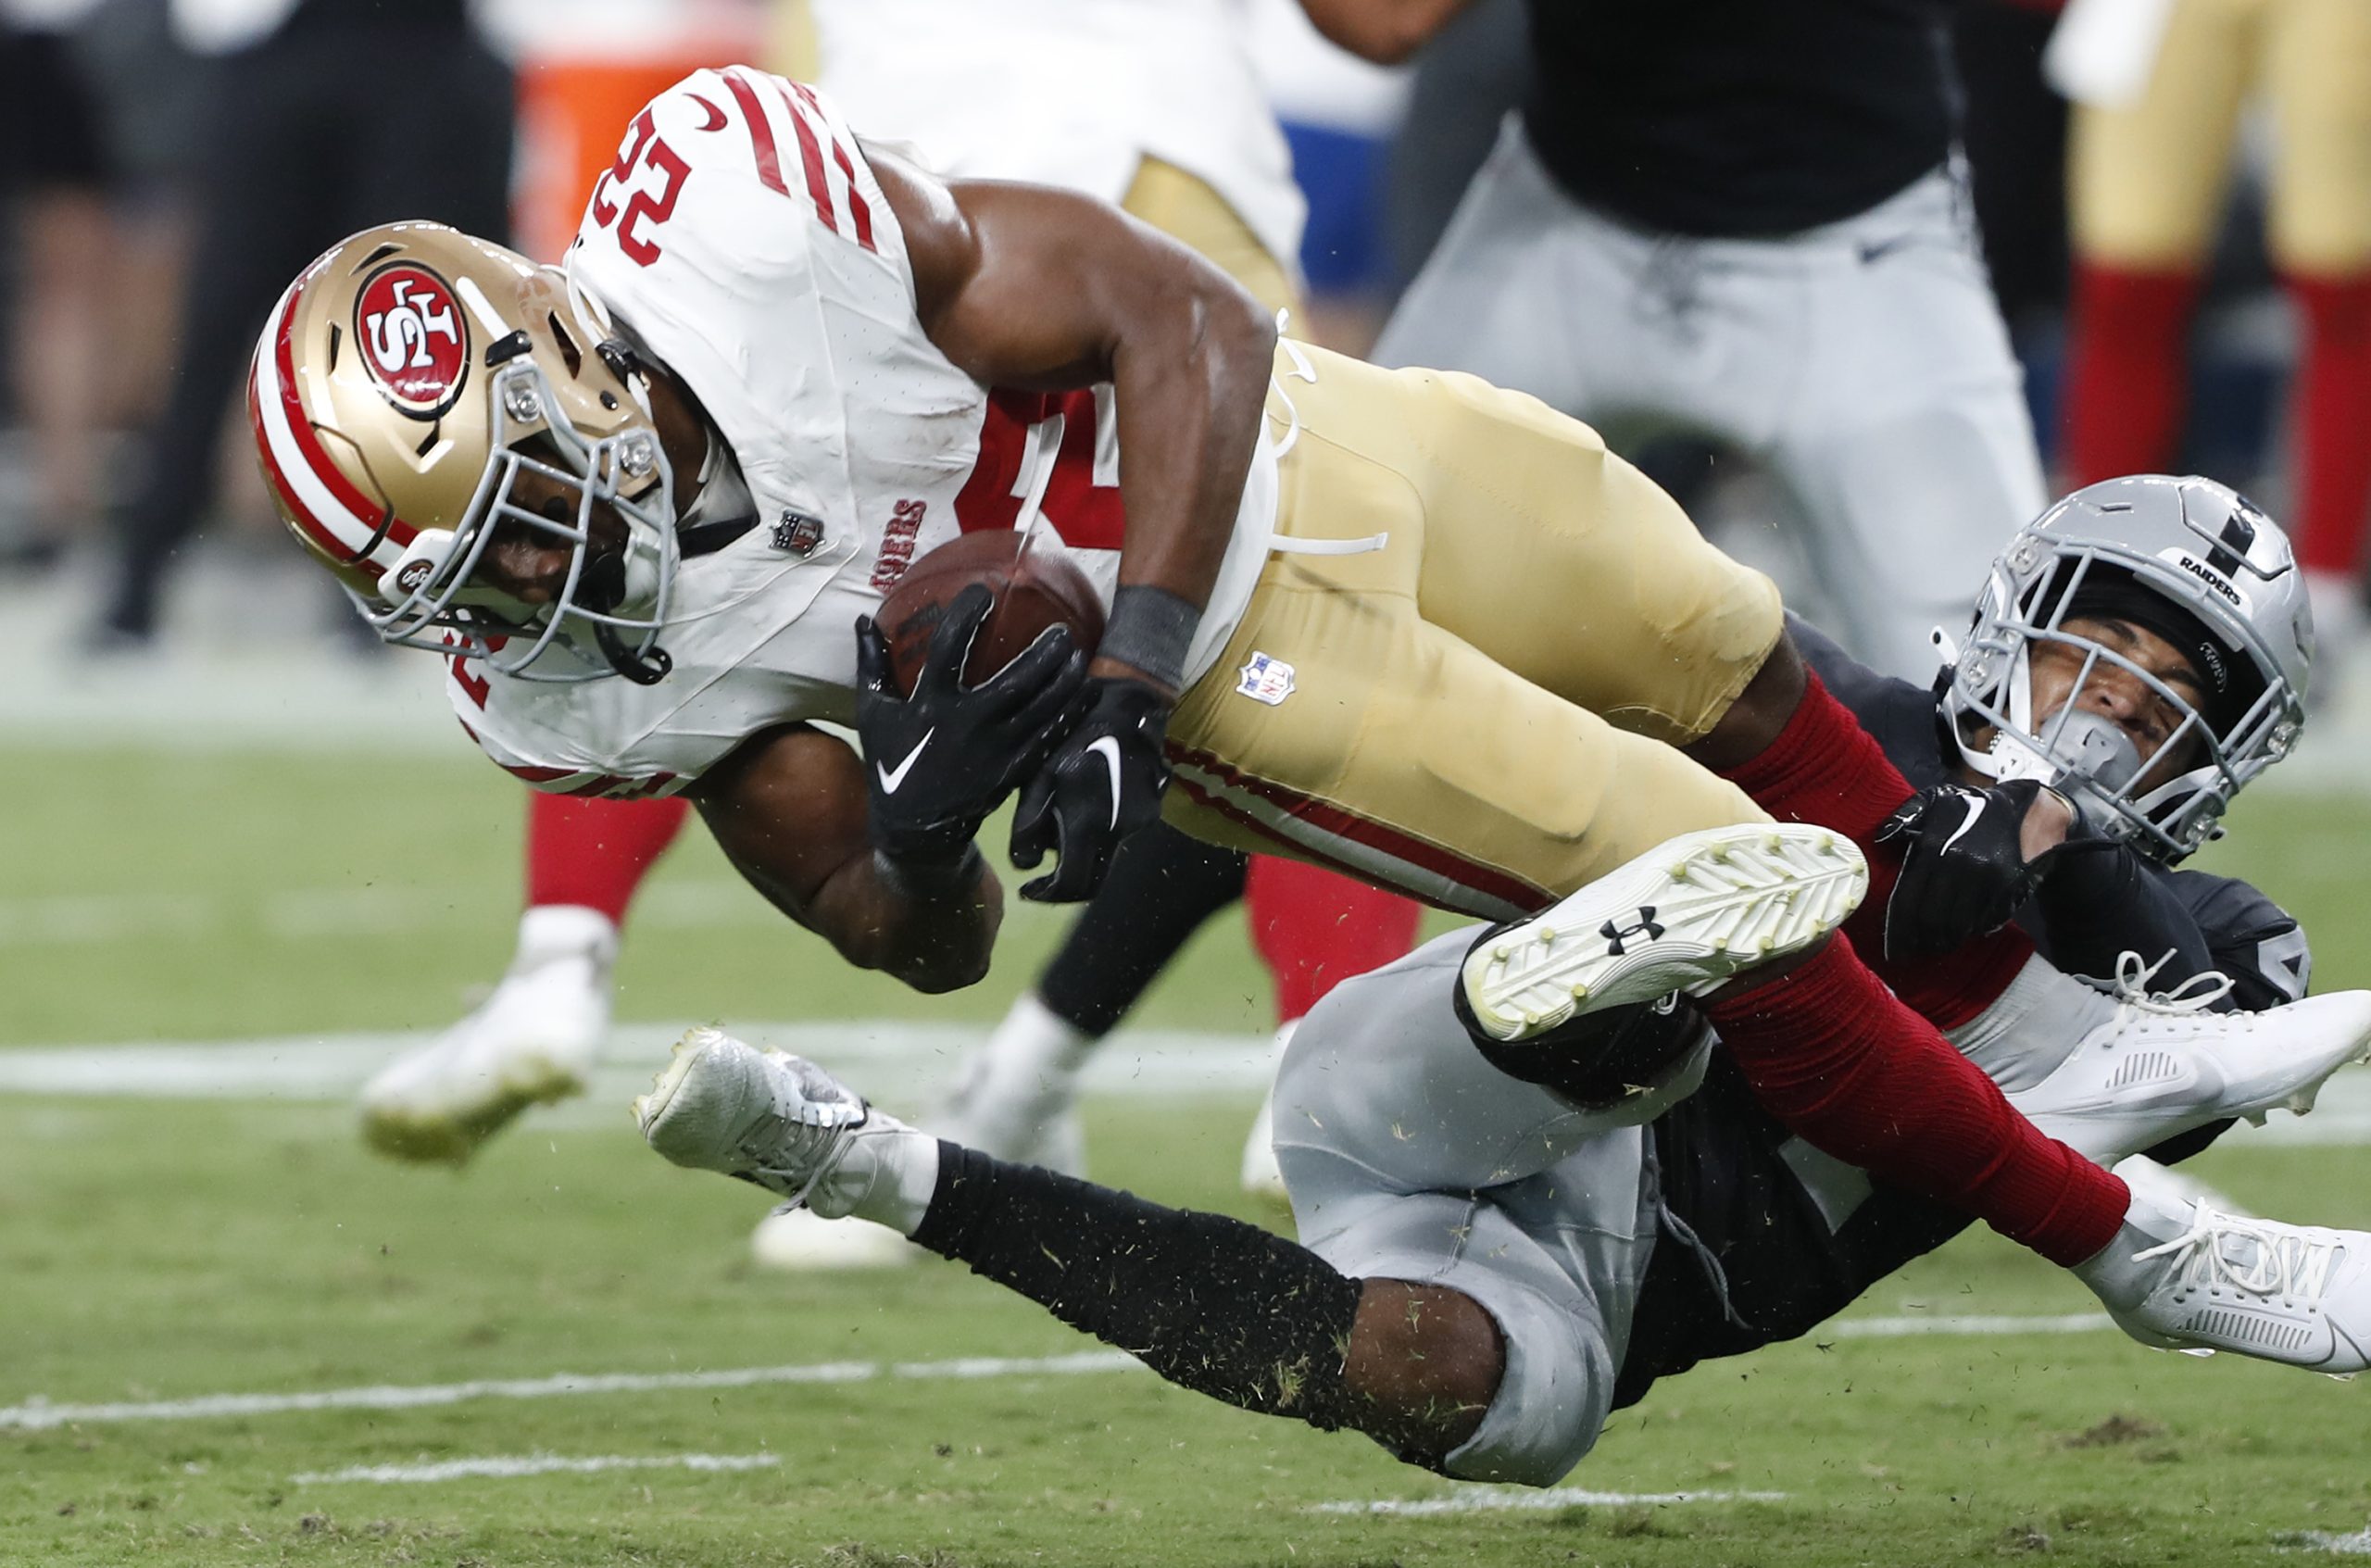 Running back Jeremy McNichols #22 of the San Francisco 49ers is tackled by cornerback Bryce Cosby #...